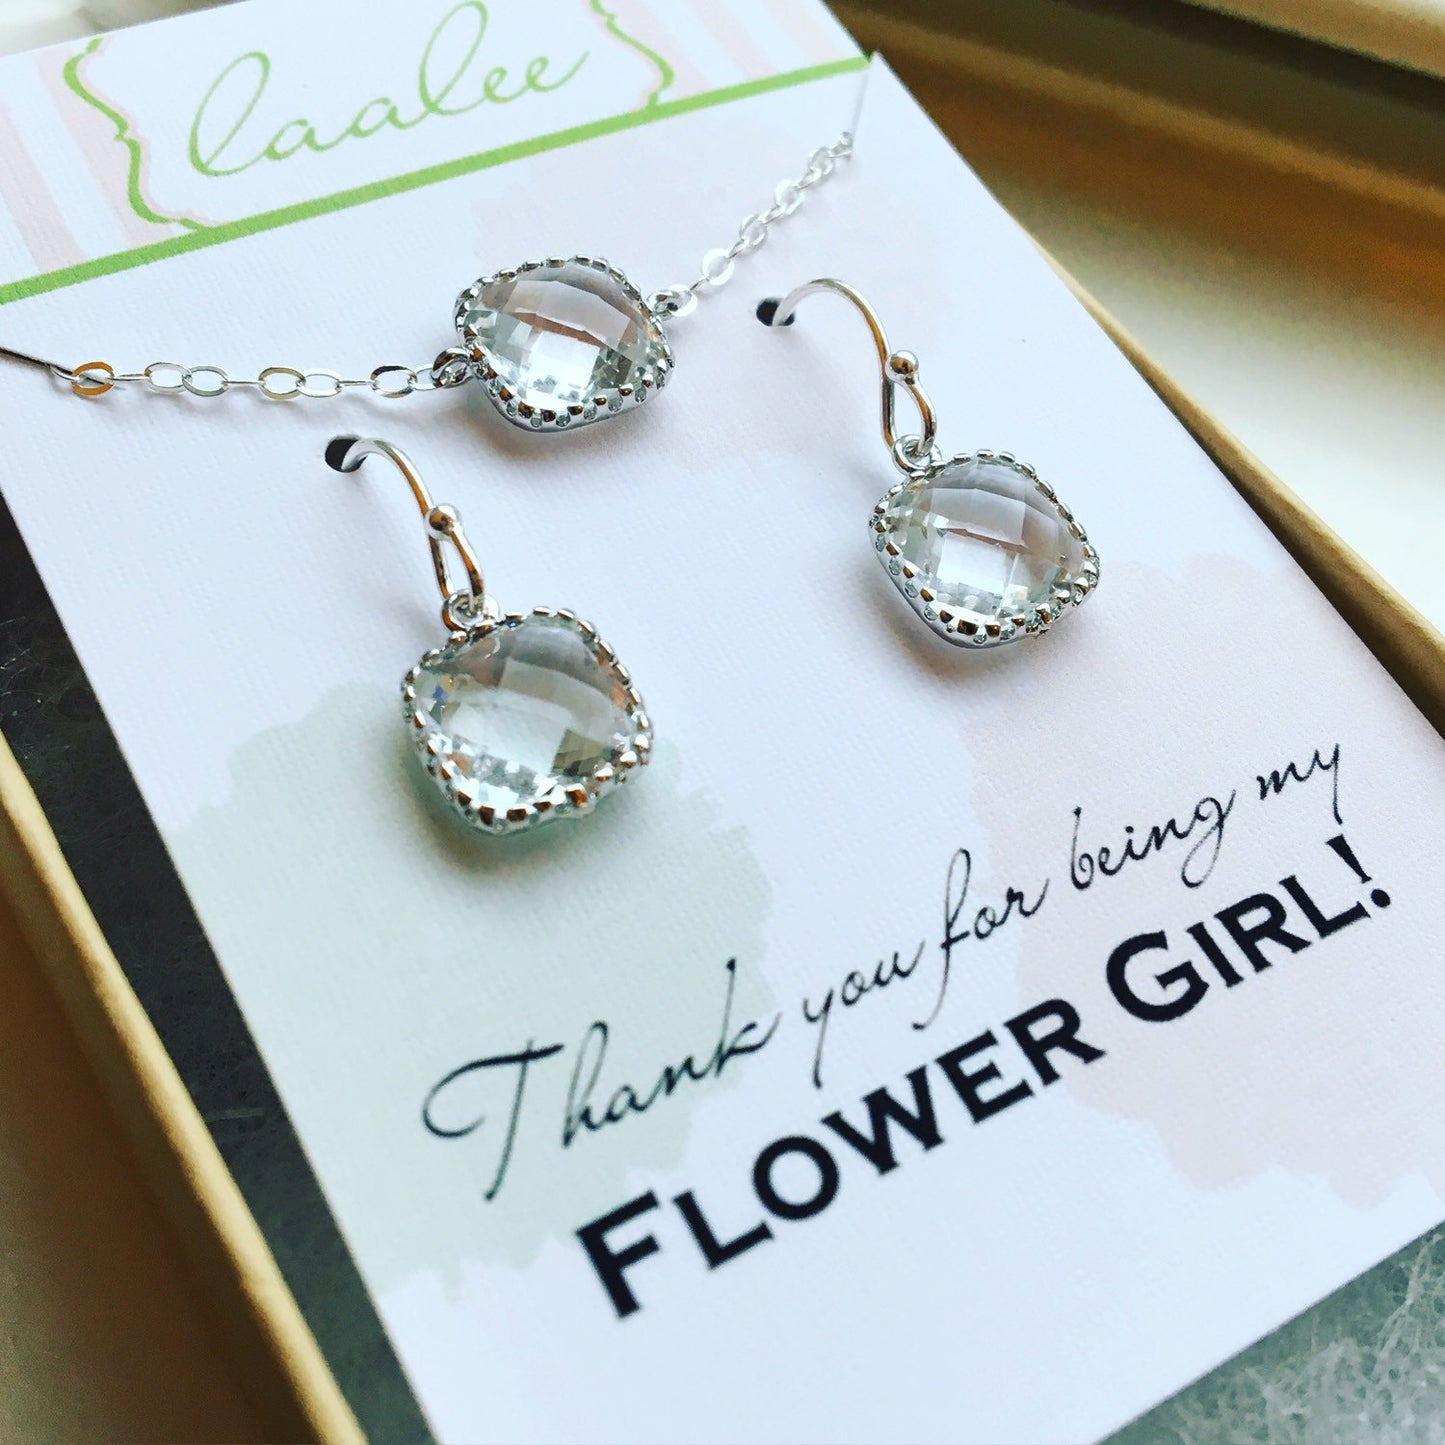 Silver Clear Crystal Necklace and Earring Set Crystal Jewelry Set - Personalized Card - Flower Girl Jewelry Set Bridesmaid Jewelry Wedding